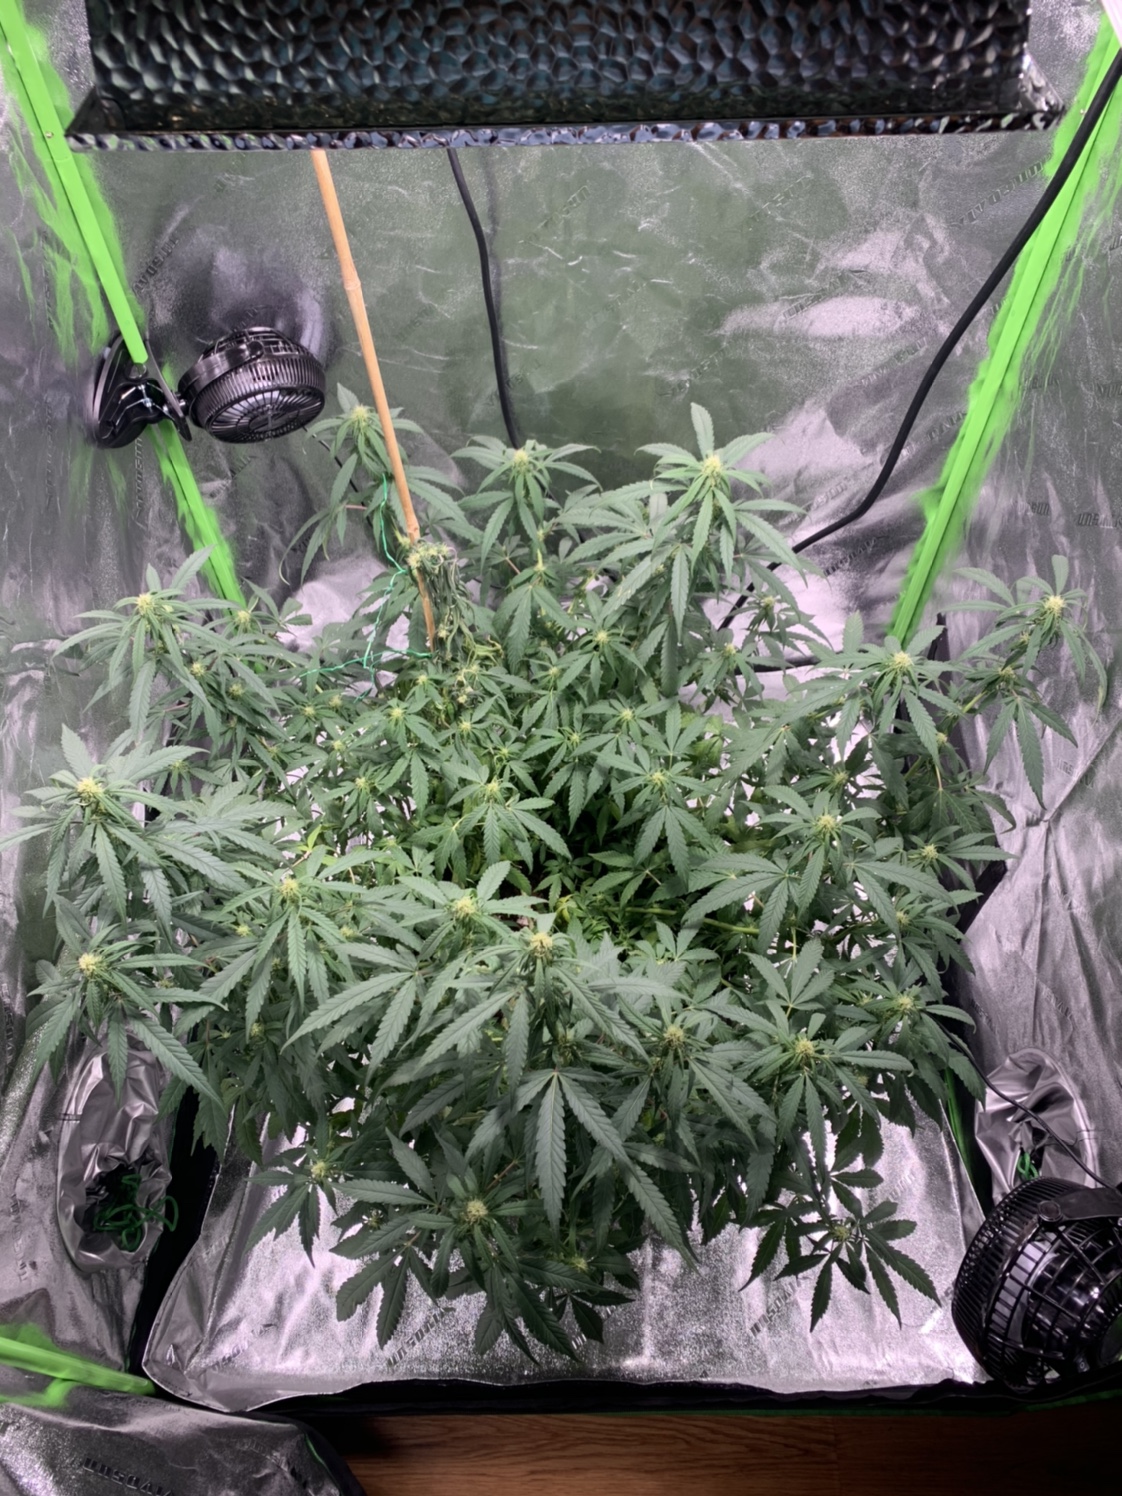 Week 2-3 of flower bent stalk dying | Grasscity Forums - The #1 ...